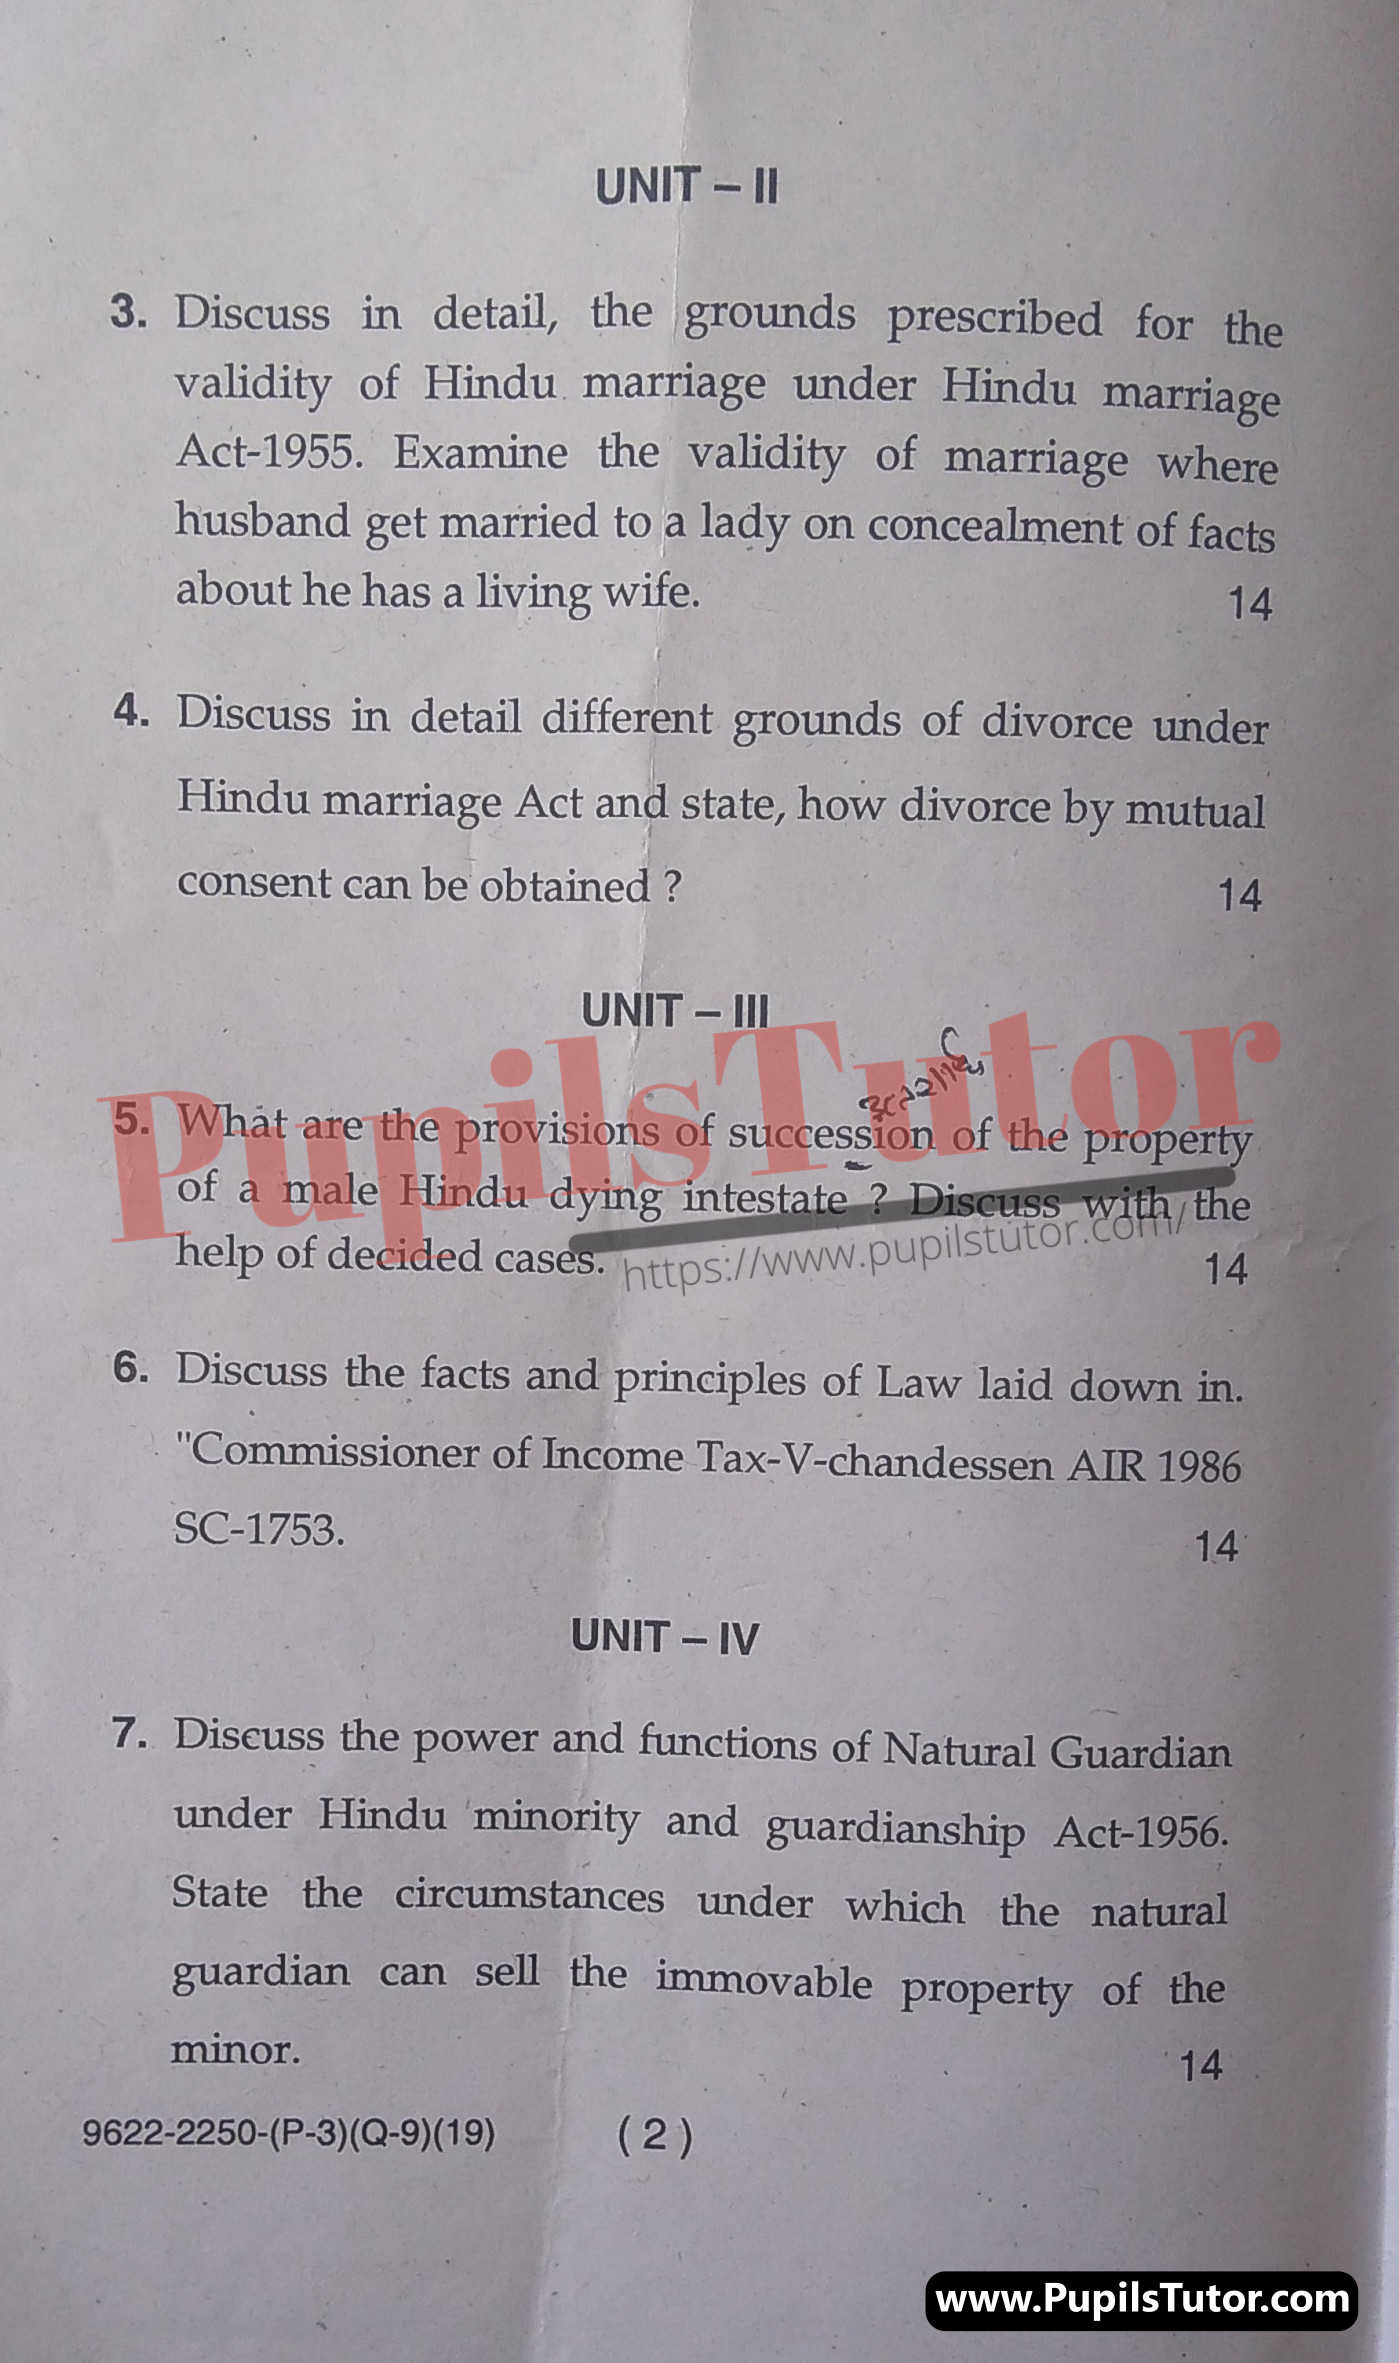 M.D. University B.A. LL.B. Family Law - I Fifth Semester Important Question Answer And Solution - www.pupilstutor.com (Paper Page Number 2)